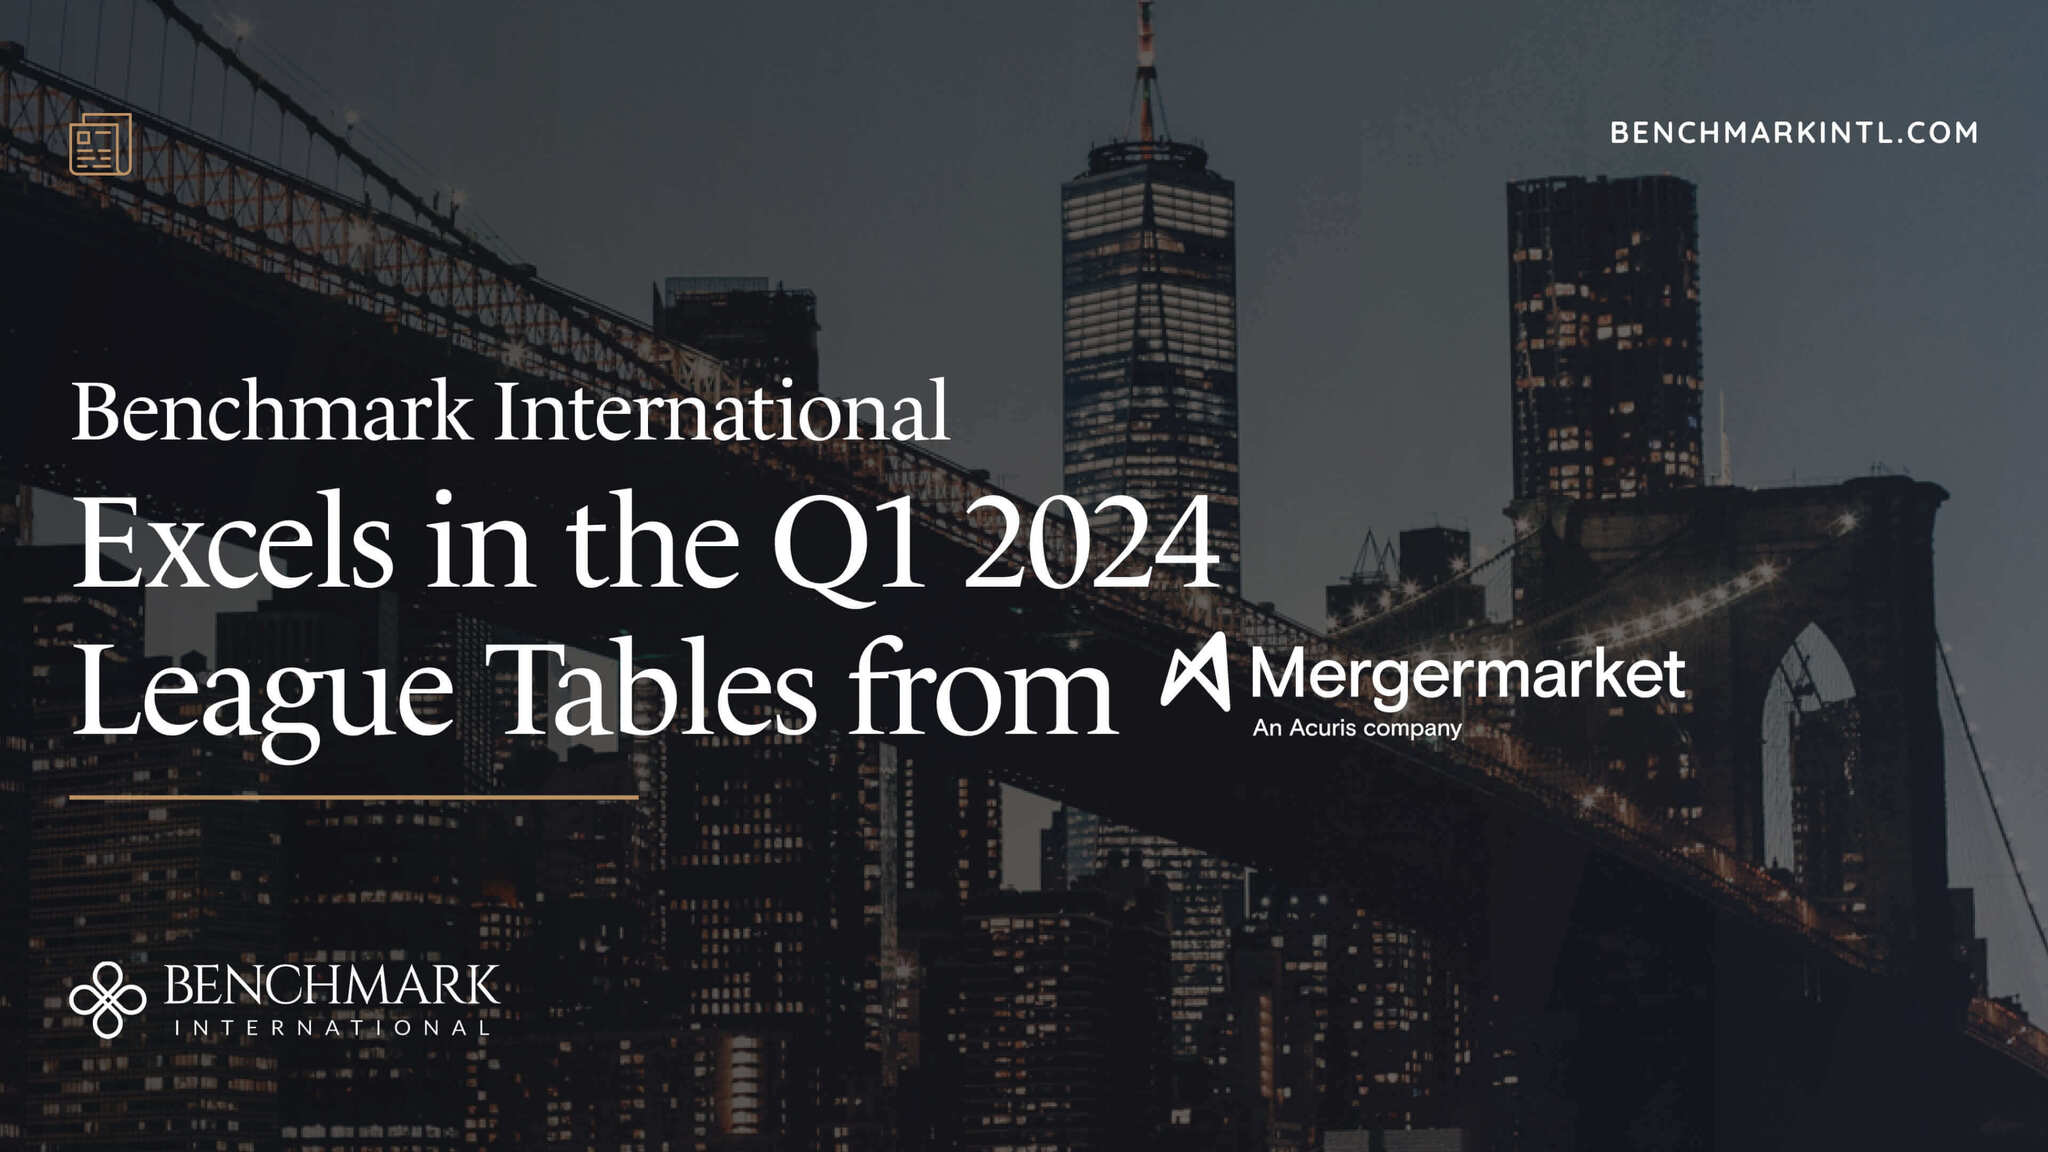 Benchmark International Excels in Mergermarket’s Q1 2024 League Tables